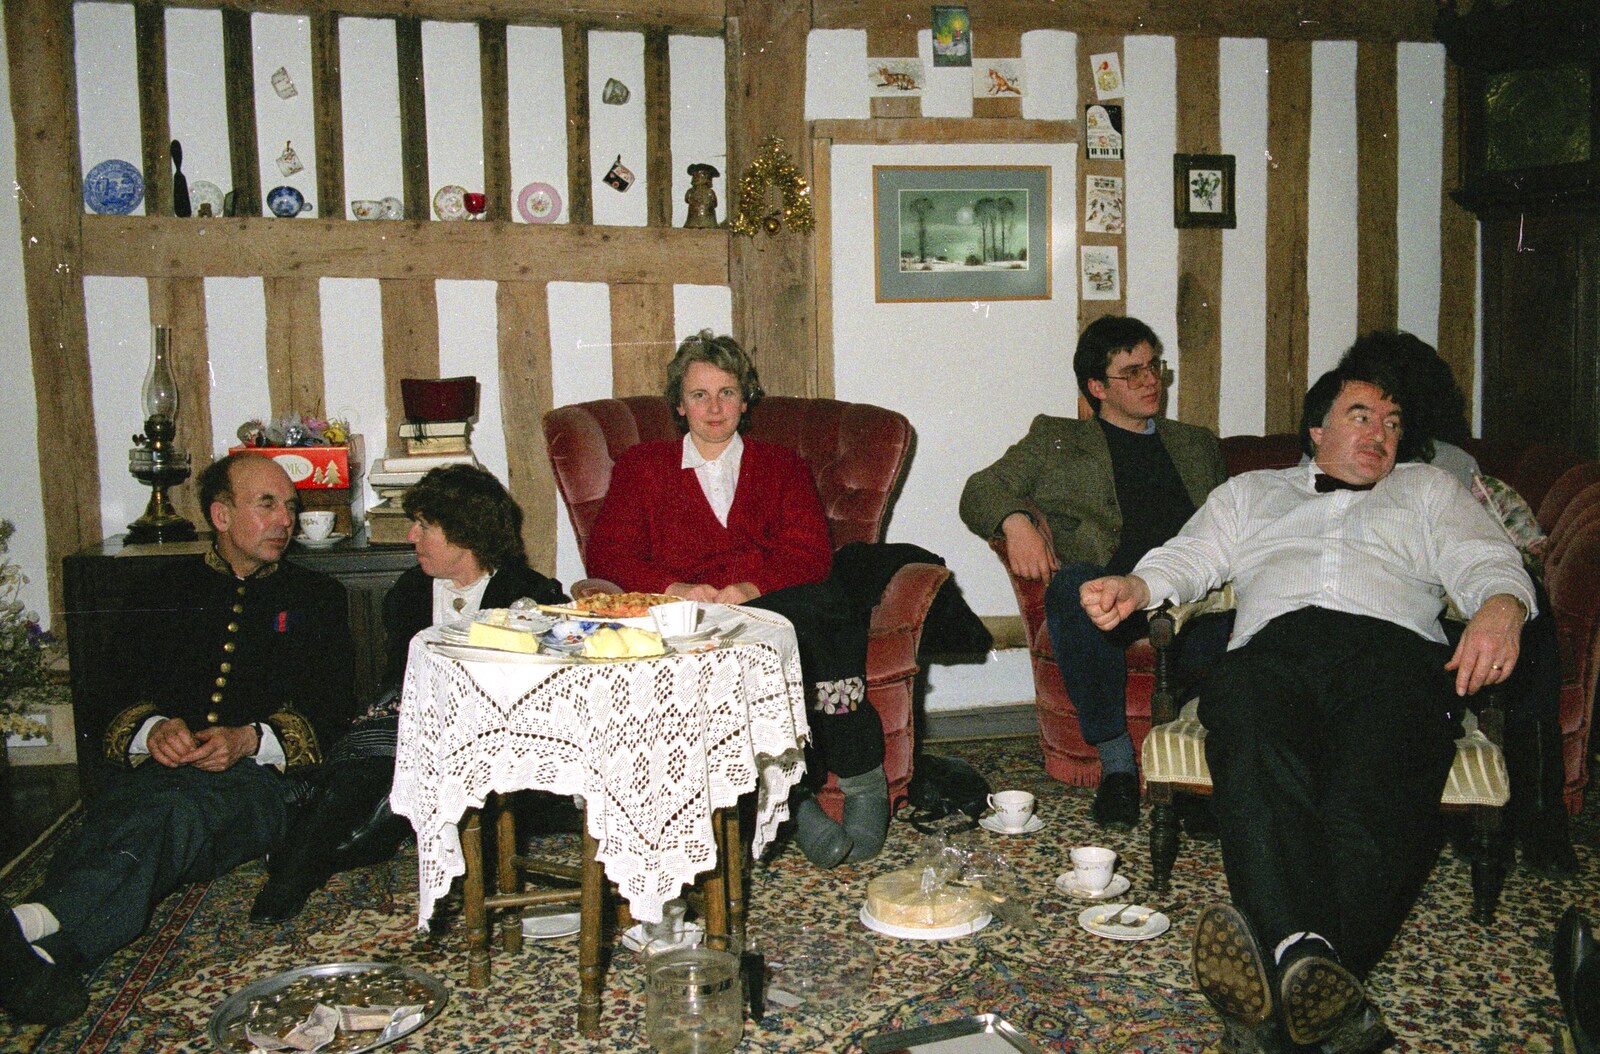 Linda Cork looks up from Late Night, and Christmas with the Coxes, Needham, Norfolk - 25th December 1989